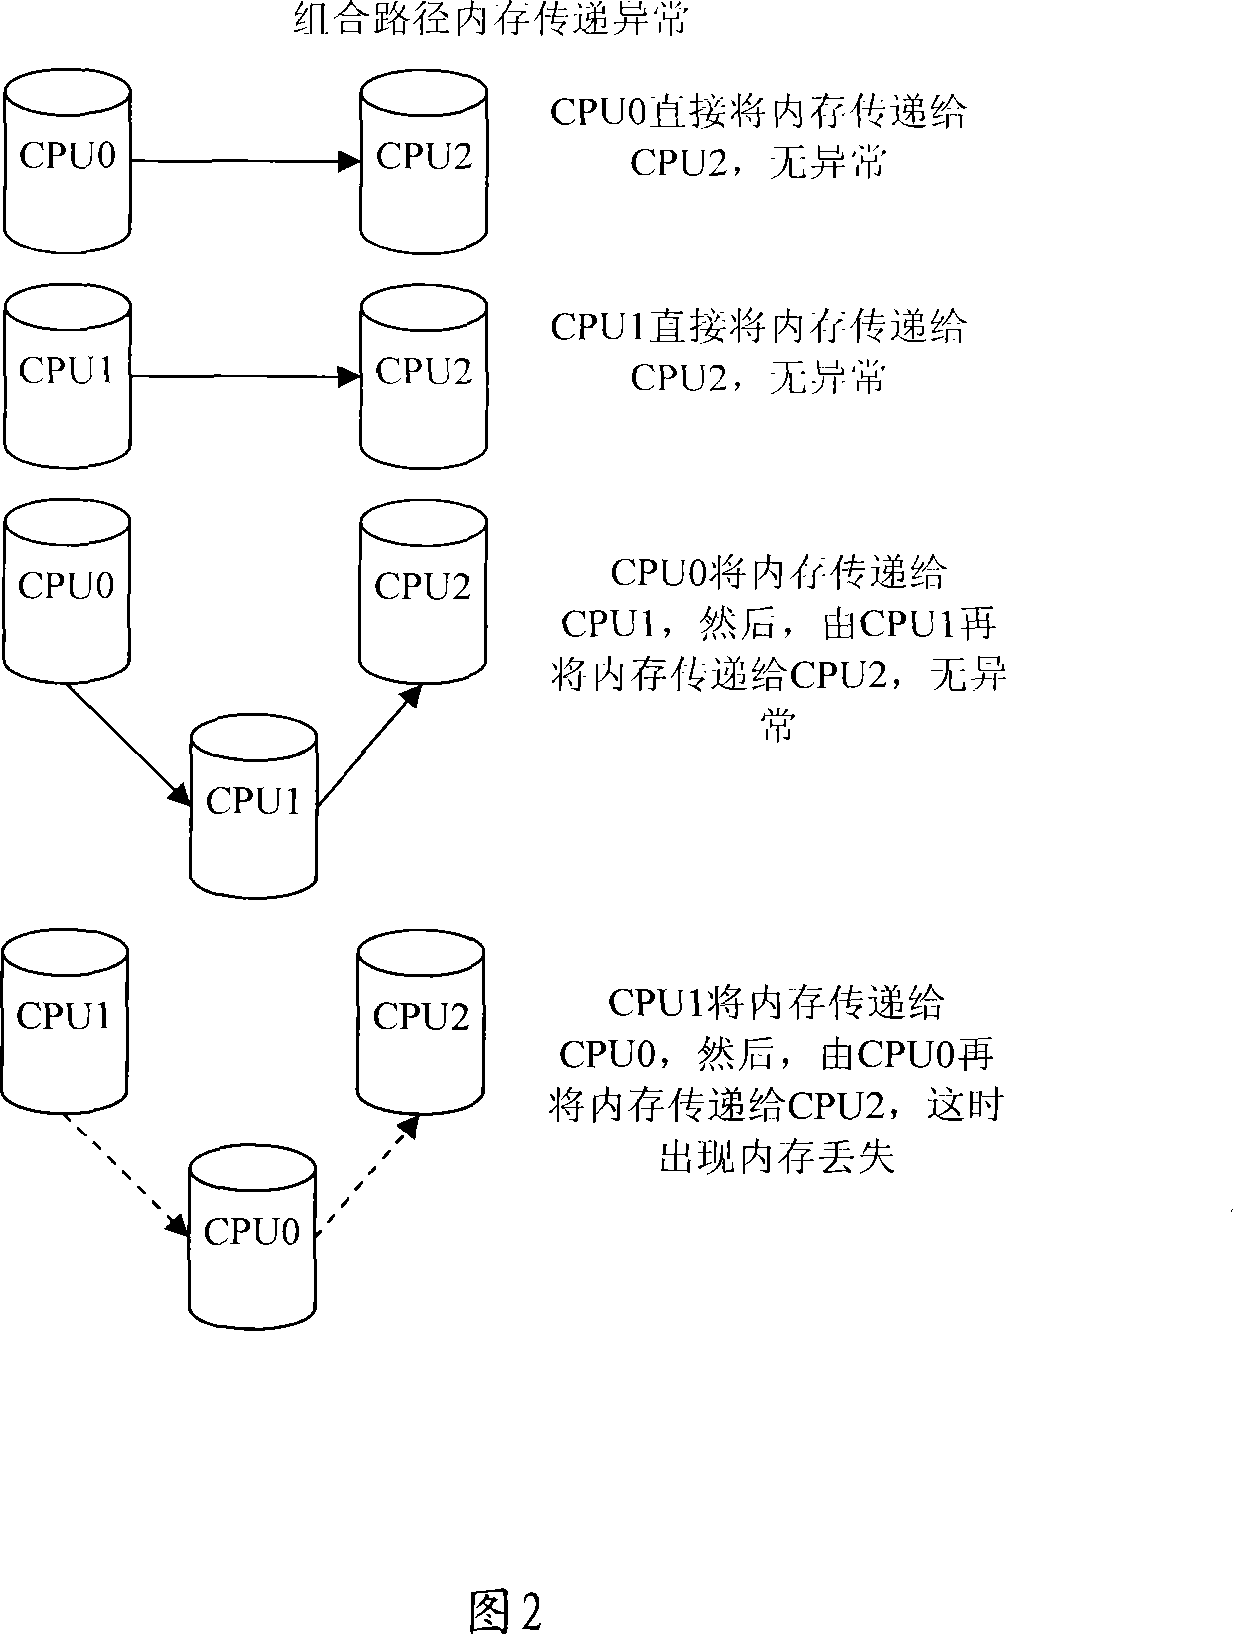 Apparatus and method for detecting internal memory transfer abnormity in multi-core system